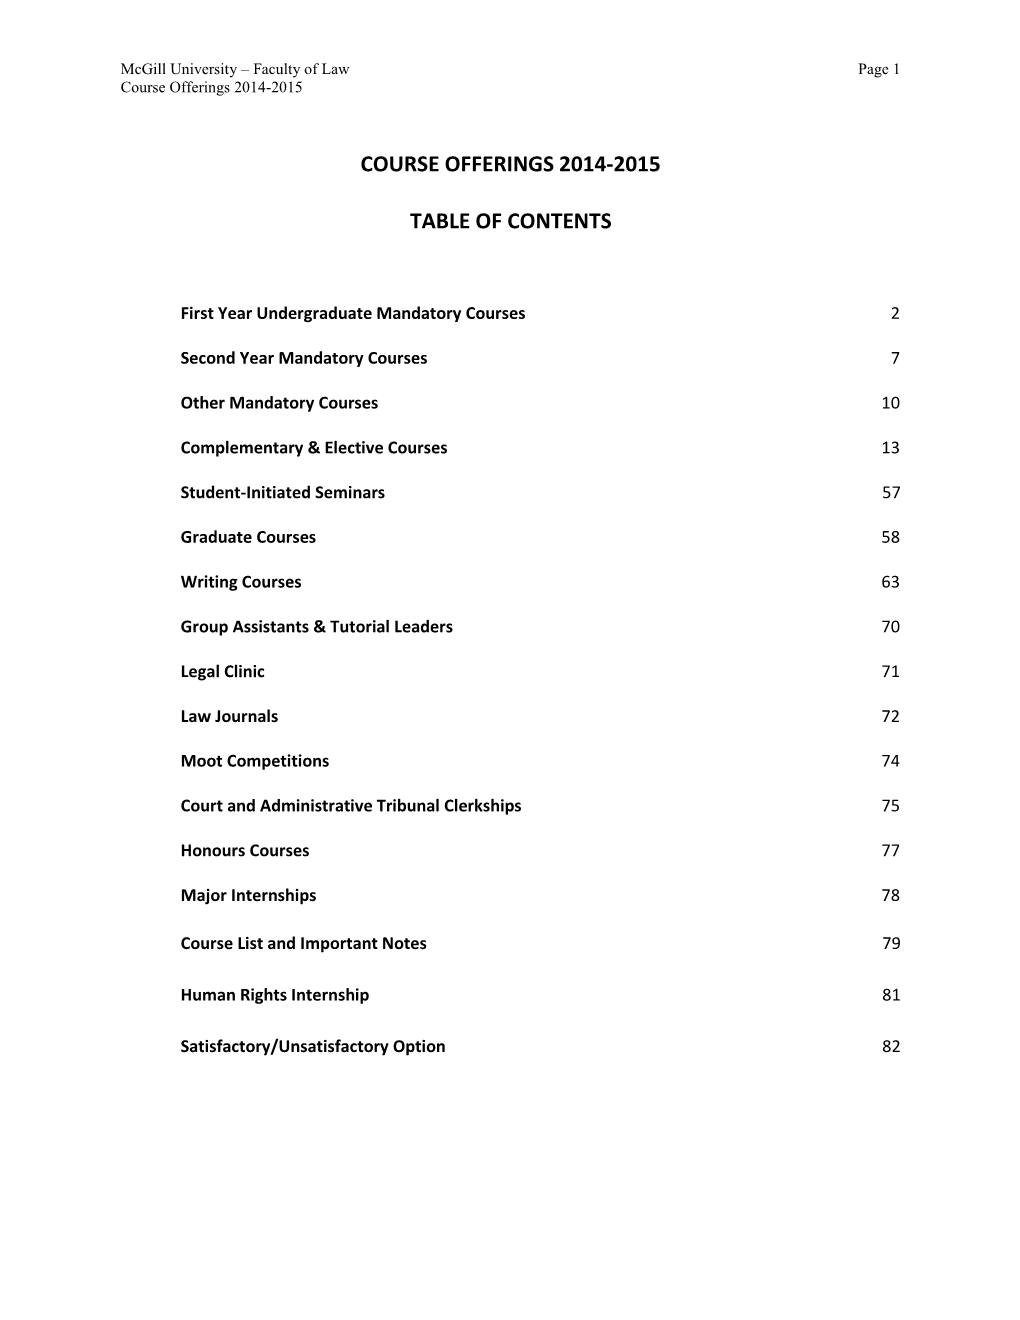 Course Offerings 2014-2015 Table of Contents